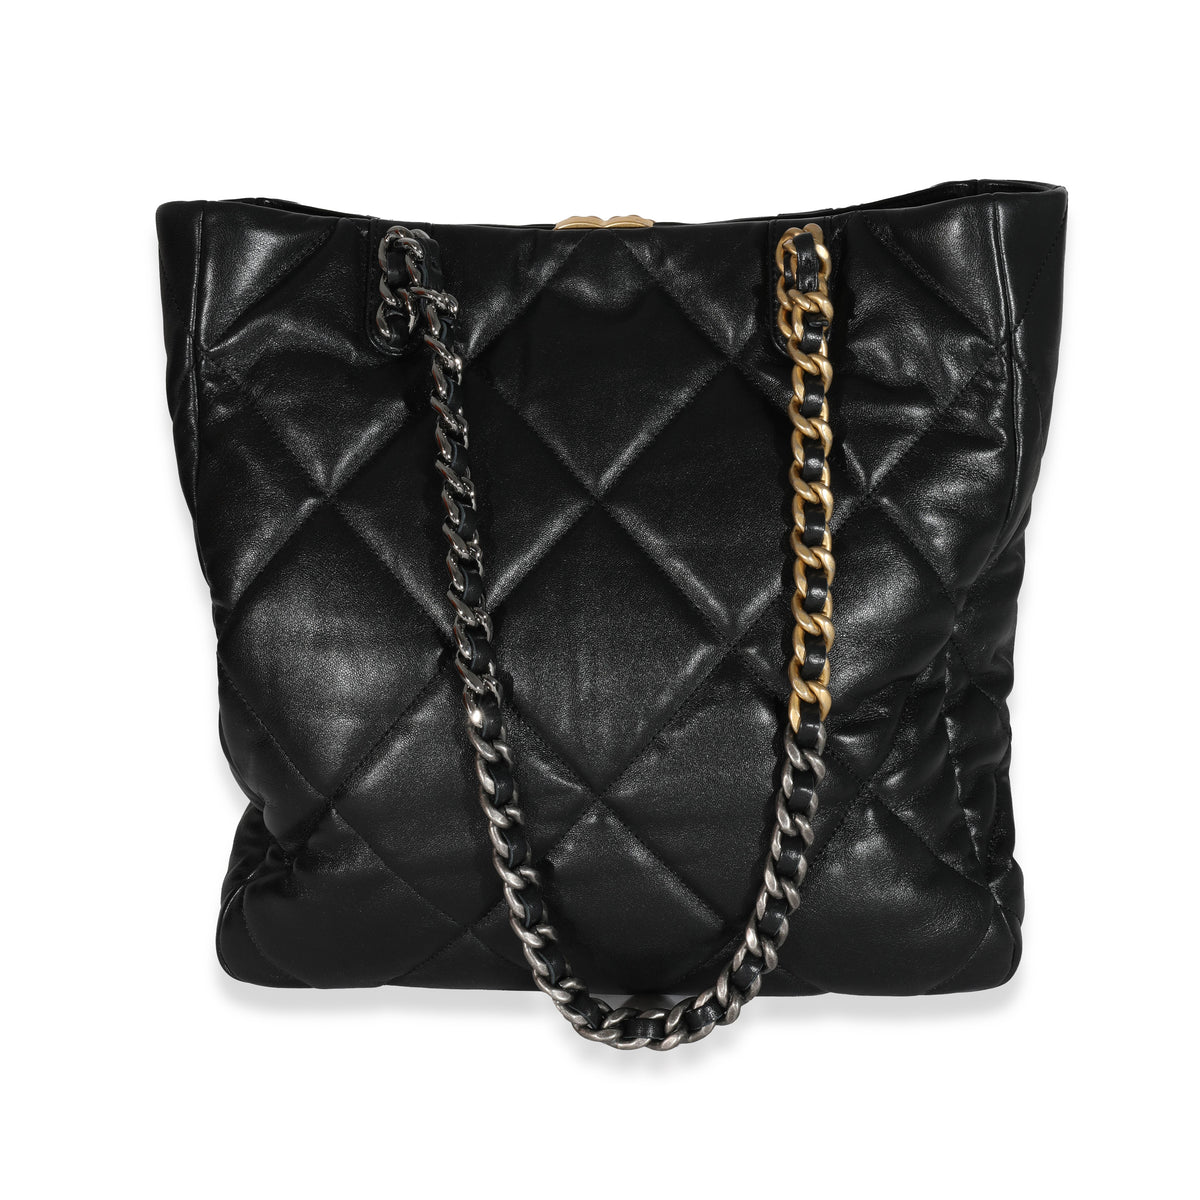 Chanel Black Lambskin Quilted Chanel 19 O Case, myGemma